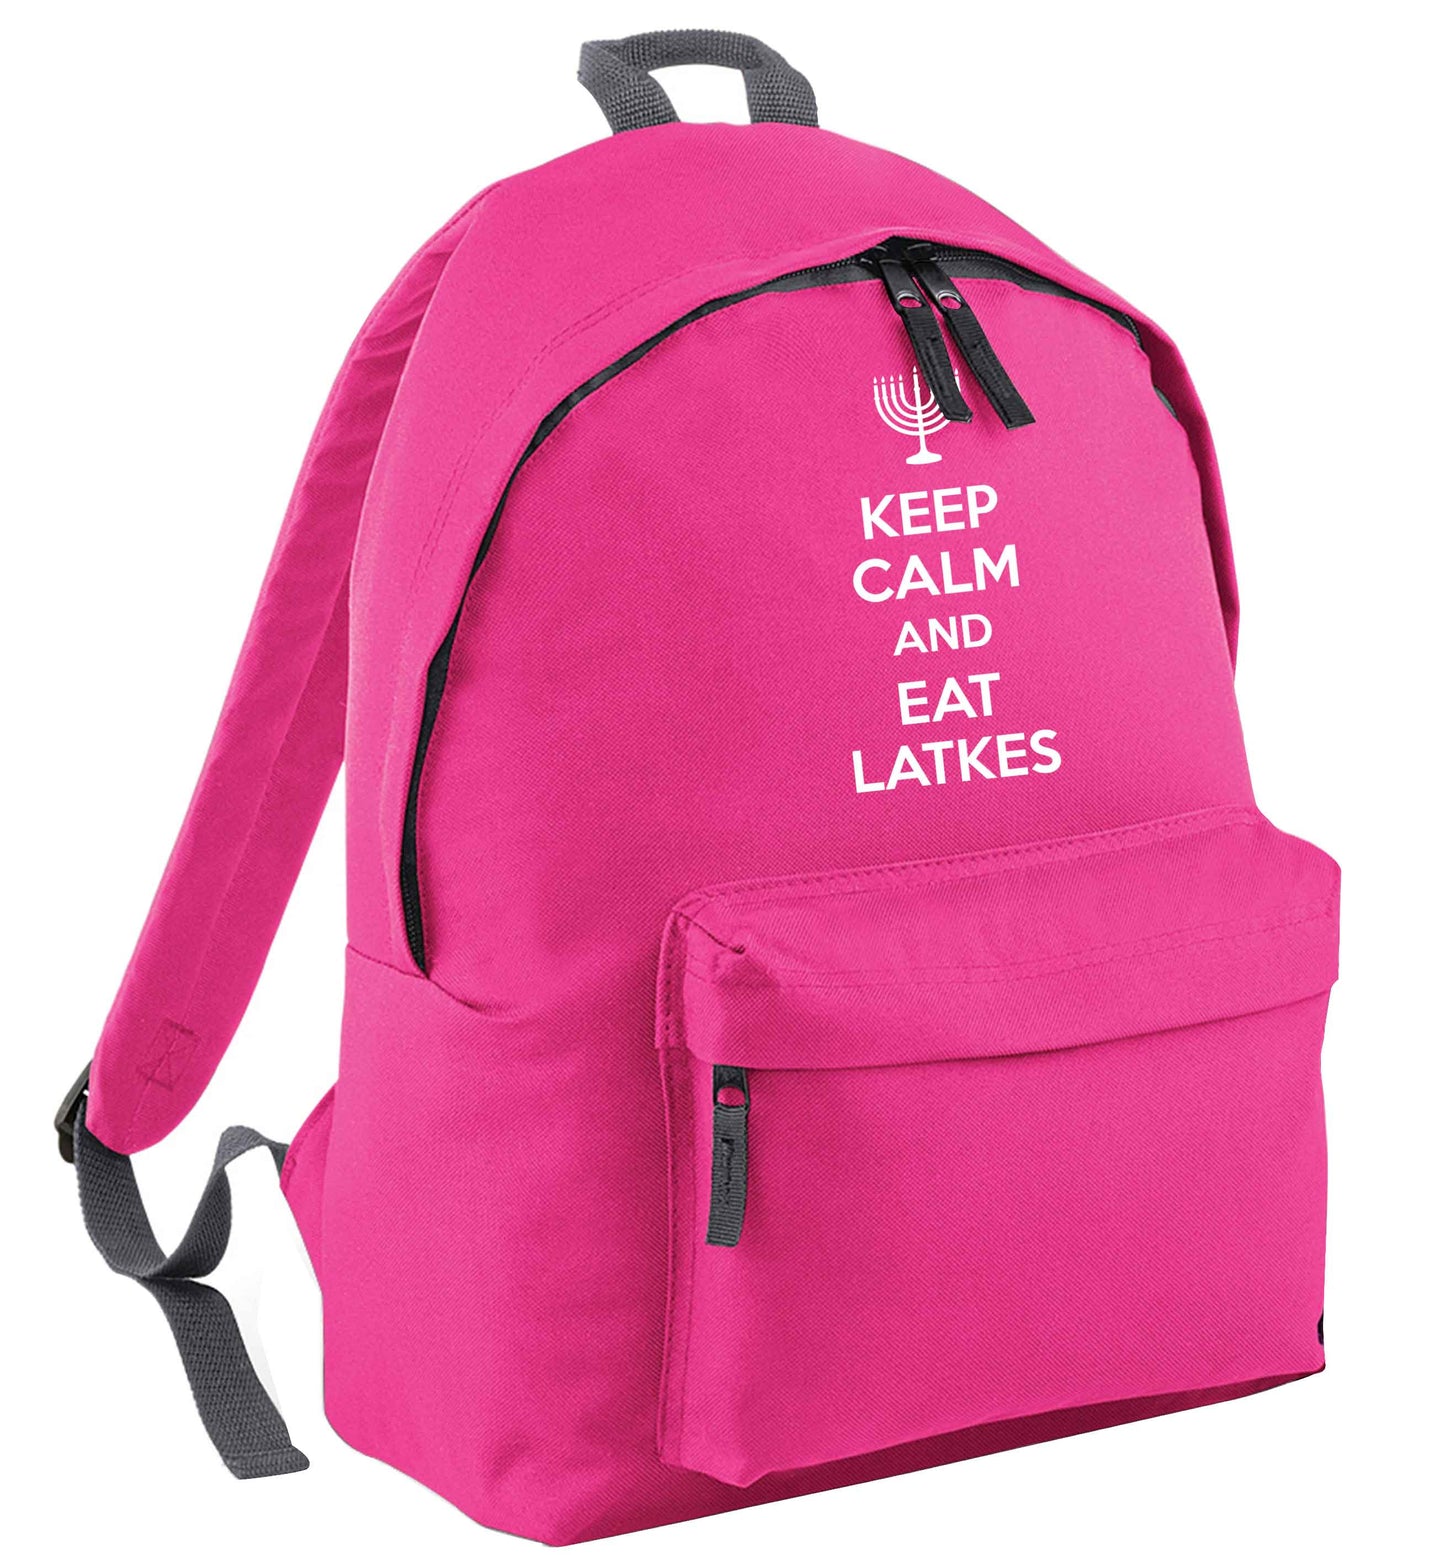 Keep calm and eat latkes | Children's backpack